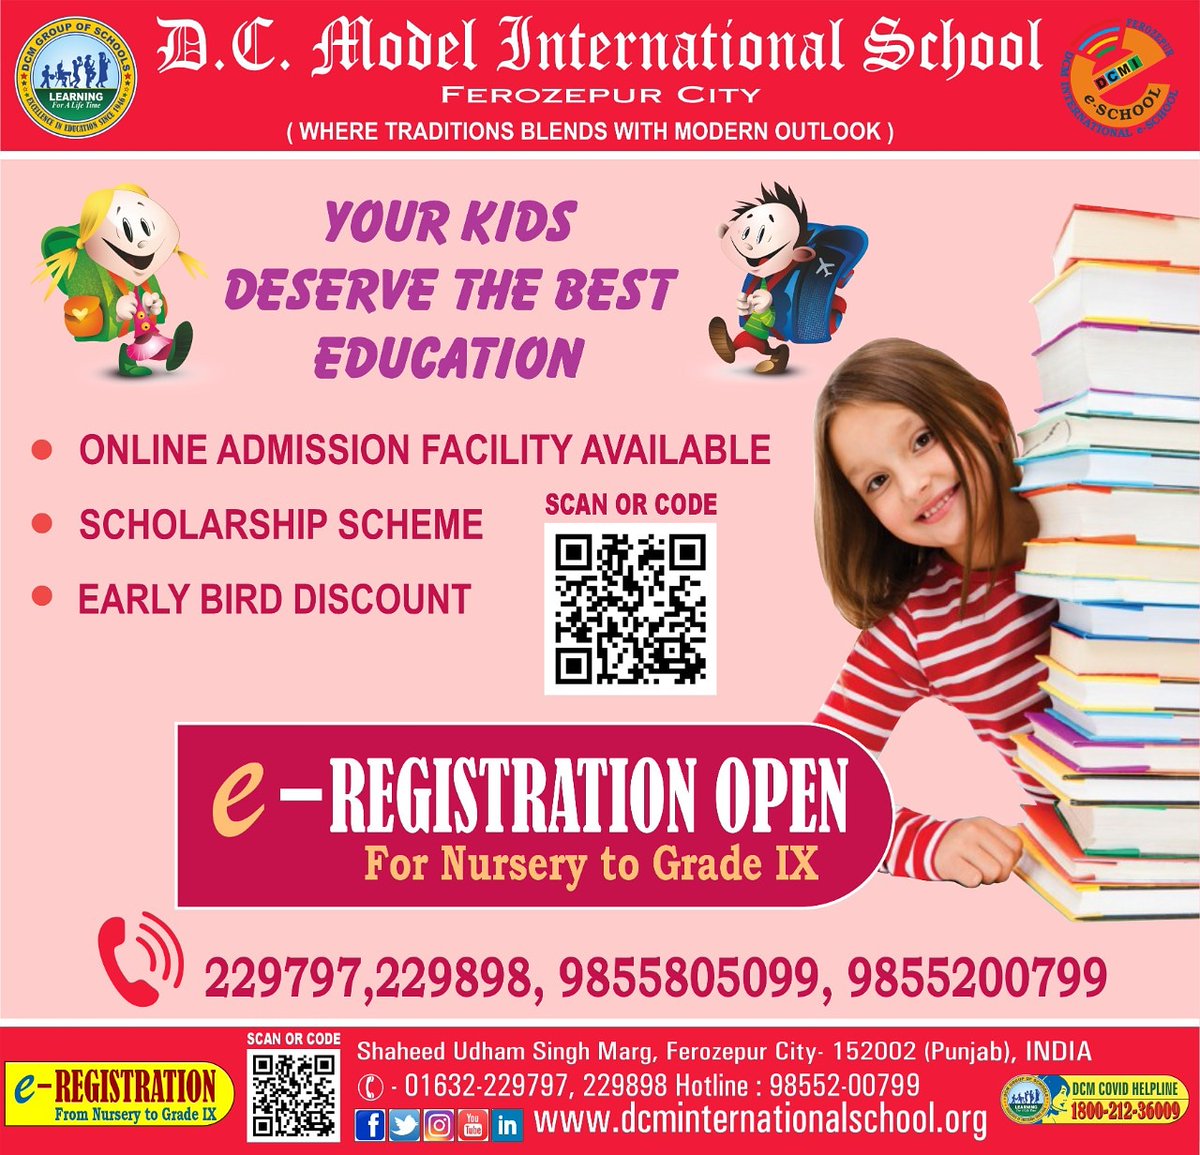 #AdmissionOpen #AdmissionOpen2021 #Scholarship #EarlyBirdDiscount #BestOnlineSchool
#BestEducation #Career #Knowledge
Link For Enquiry👇
dcmi.edinity.in/public/admissi…
Link For Admission👇
dcmi.edinity.in/public/admissi…